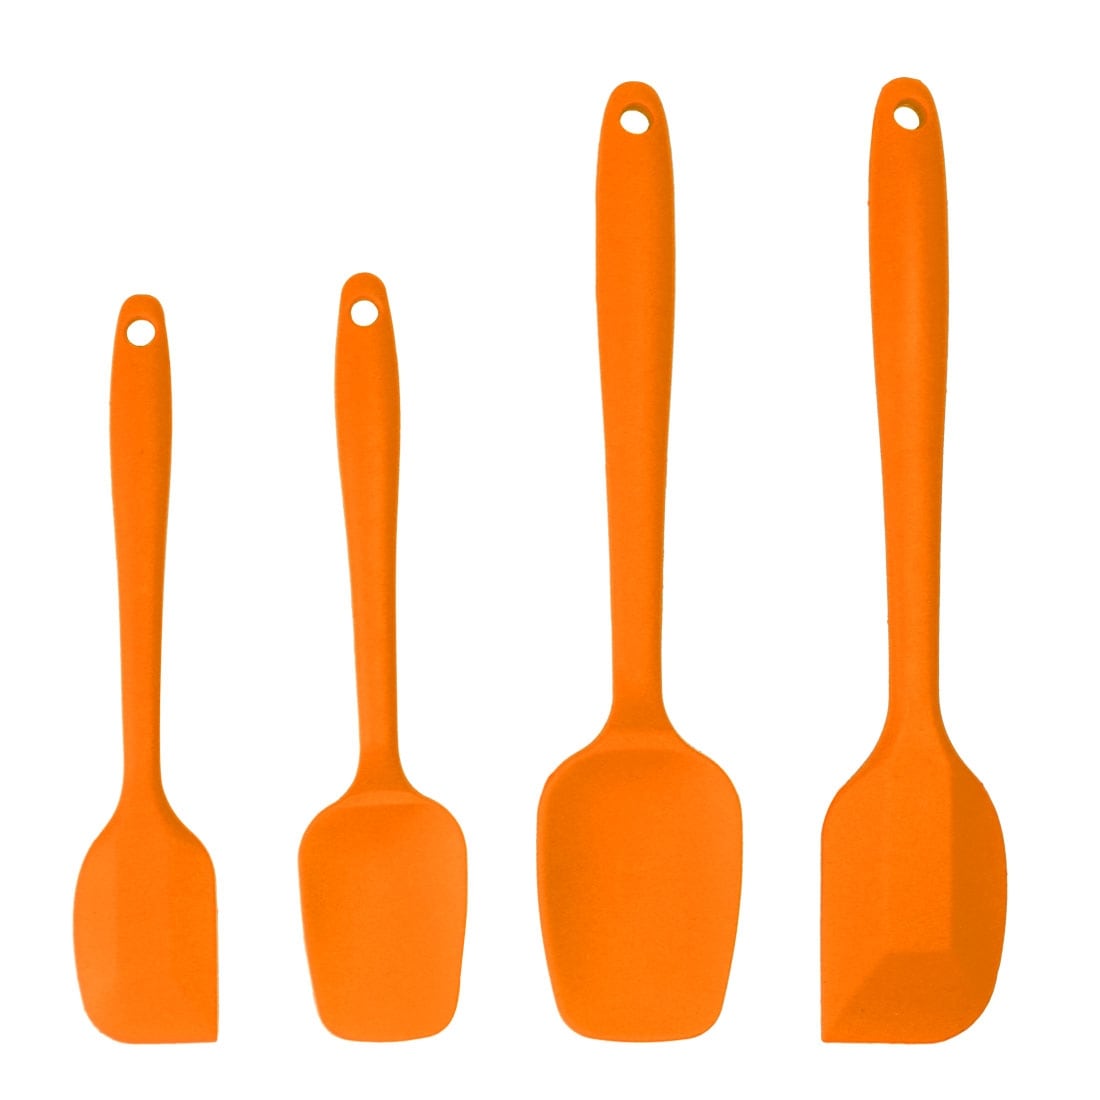 https://ak1.ostkcdn.com/images/products/is/images/direct/c37509f82eff6083d742c872d5c6601f322c287d/Silicone-Spatula-Set-4-Pcs-Heat-Resistant-Non-scratch-Kitchen-Turner-Non-Stick-Spatulas-for-Cooking-Scraping-and-Mixing-Orange.jpg